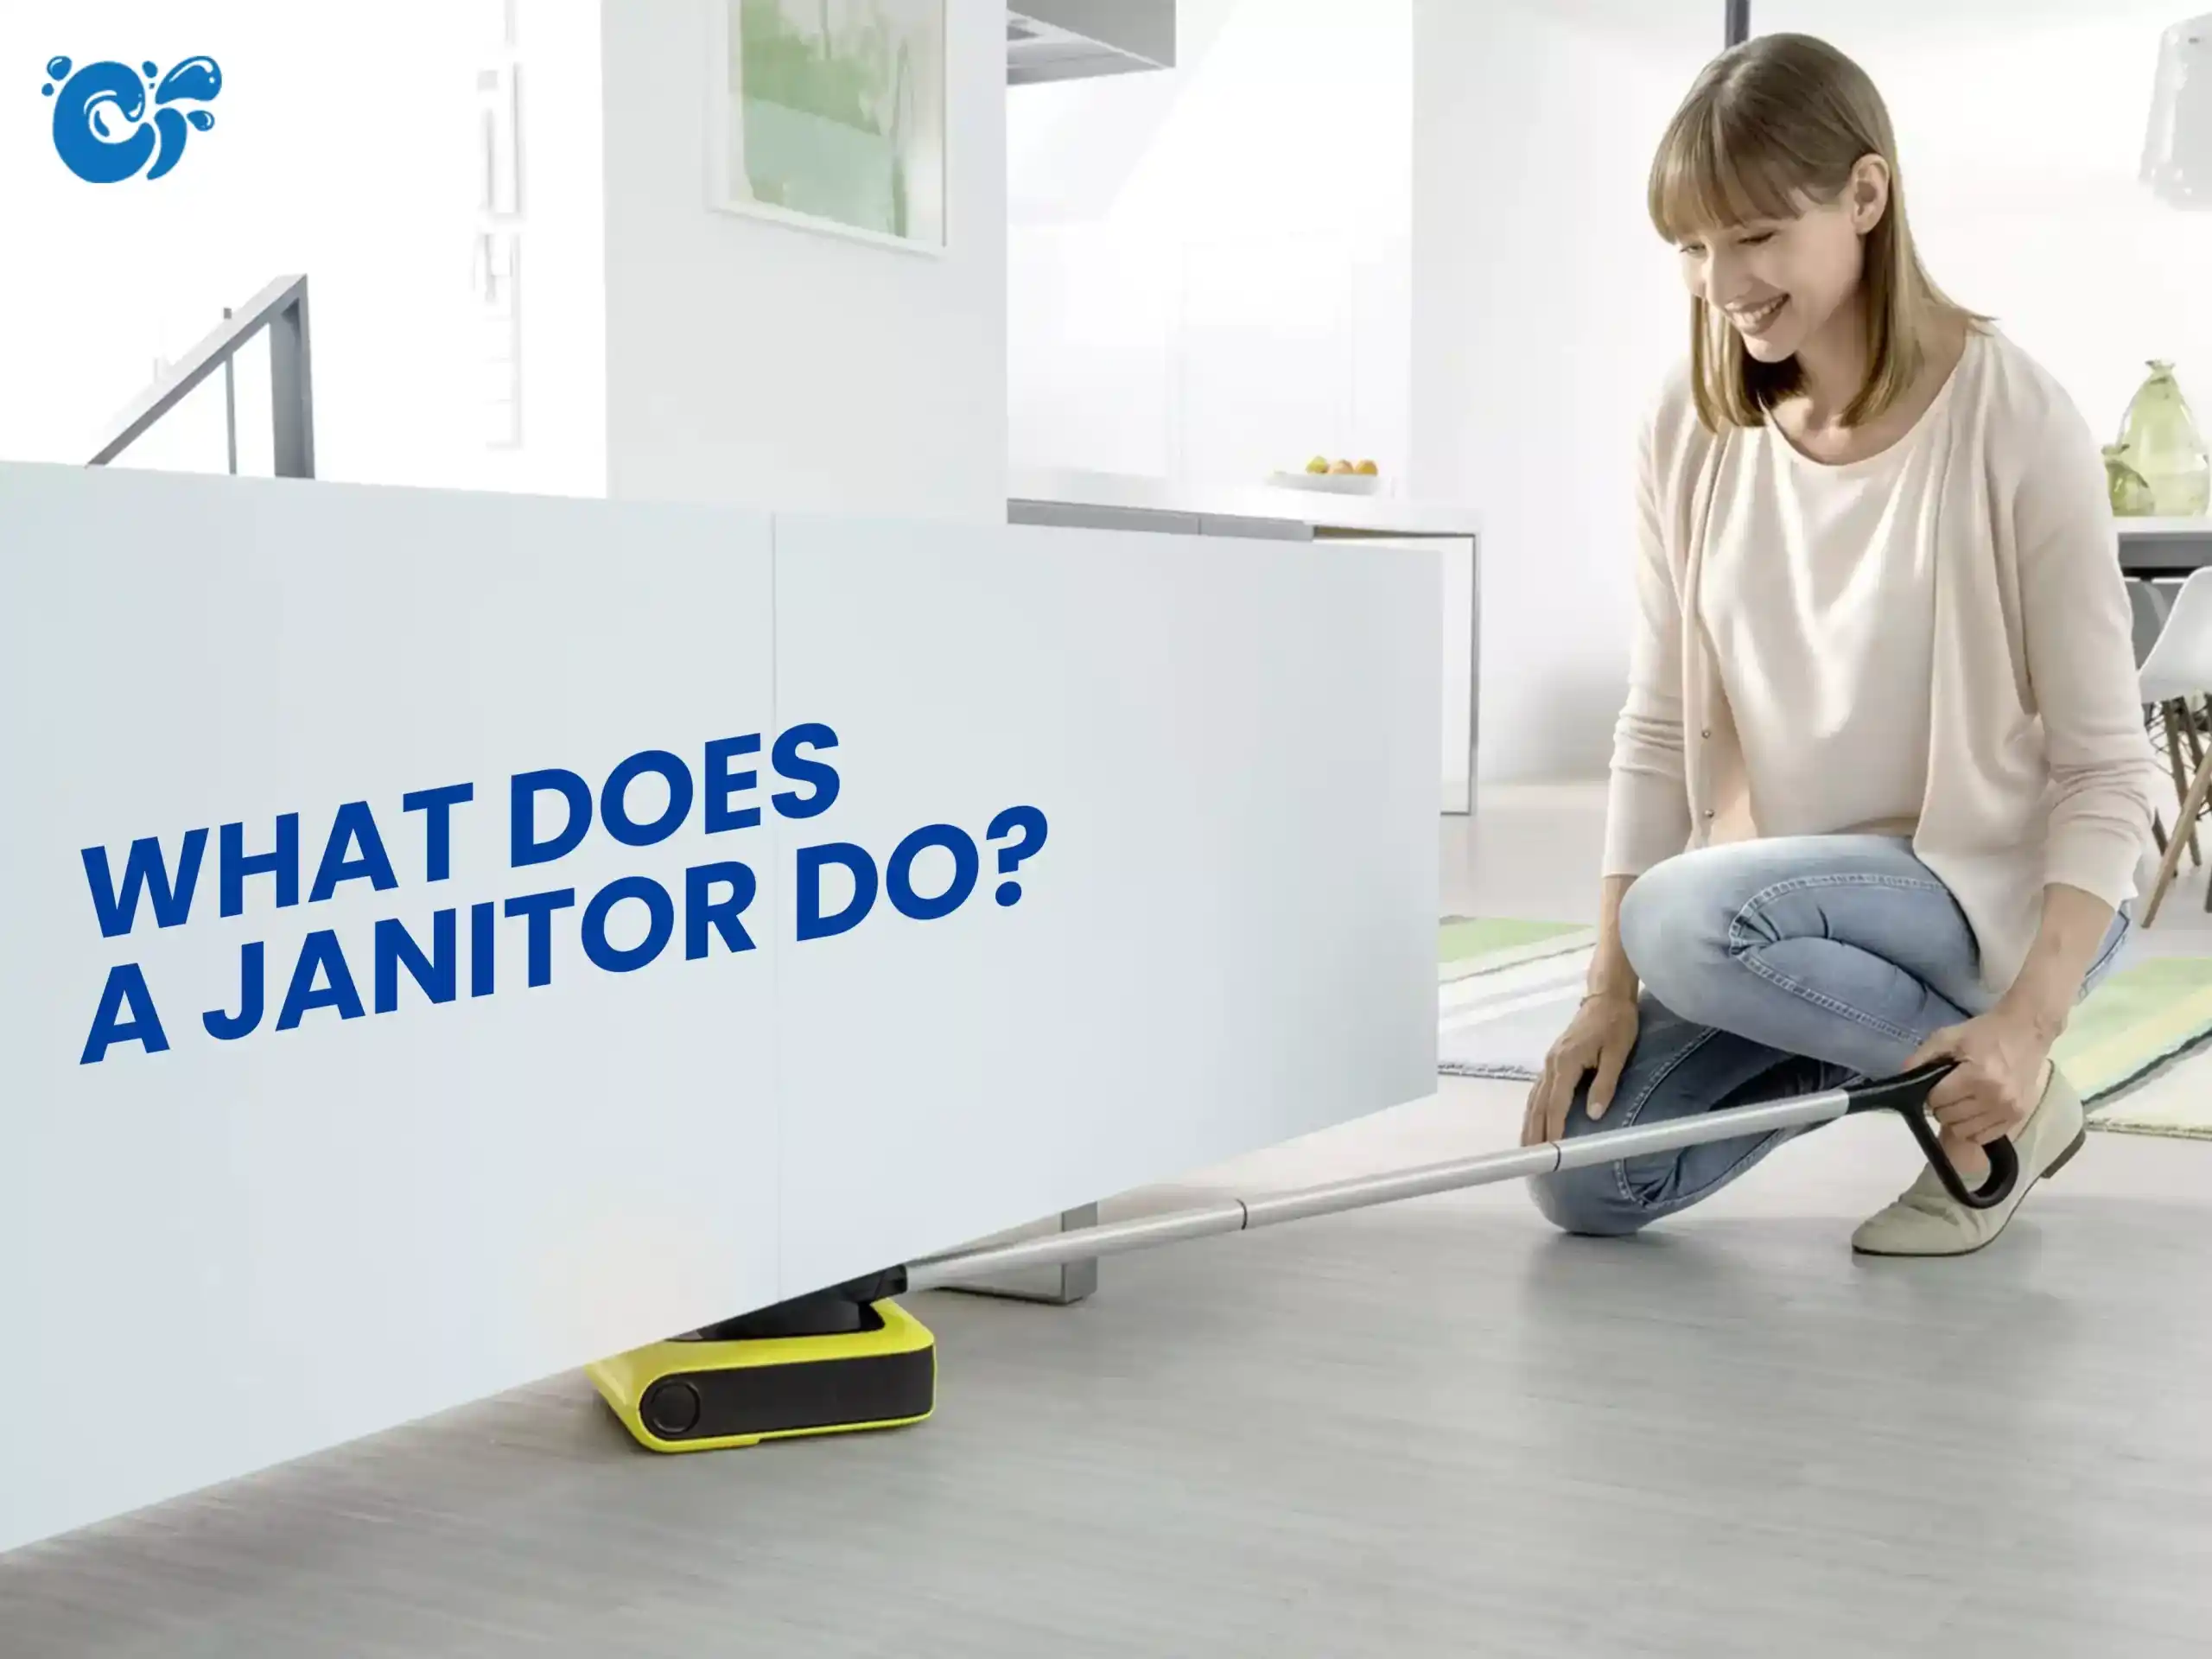 What Does a Janitor Do